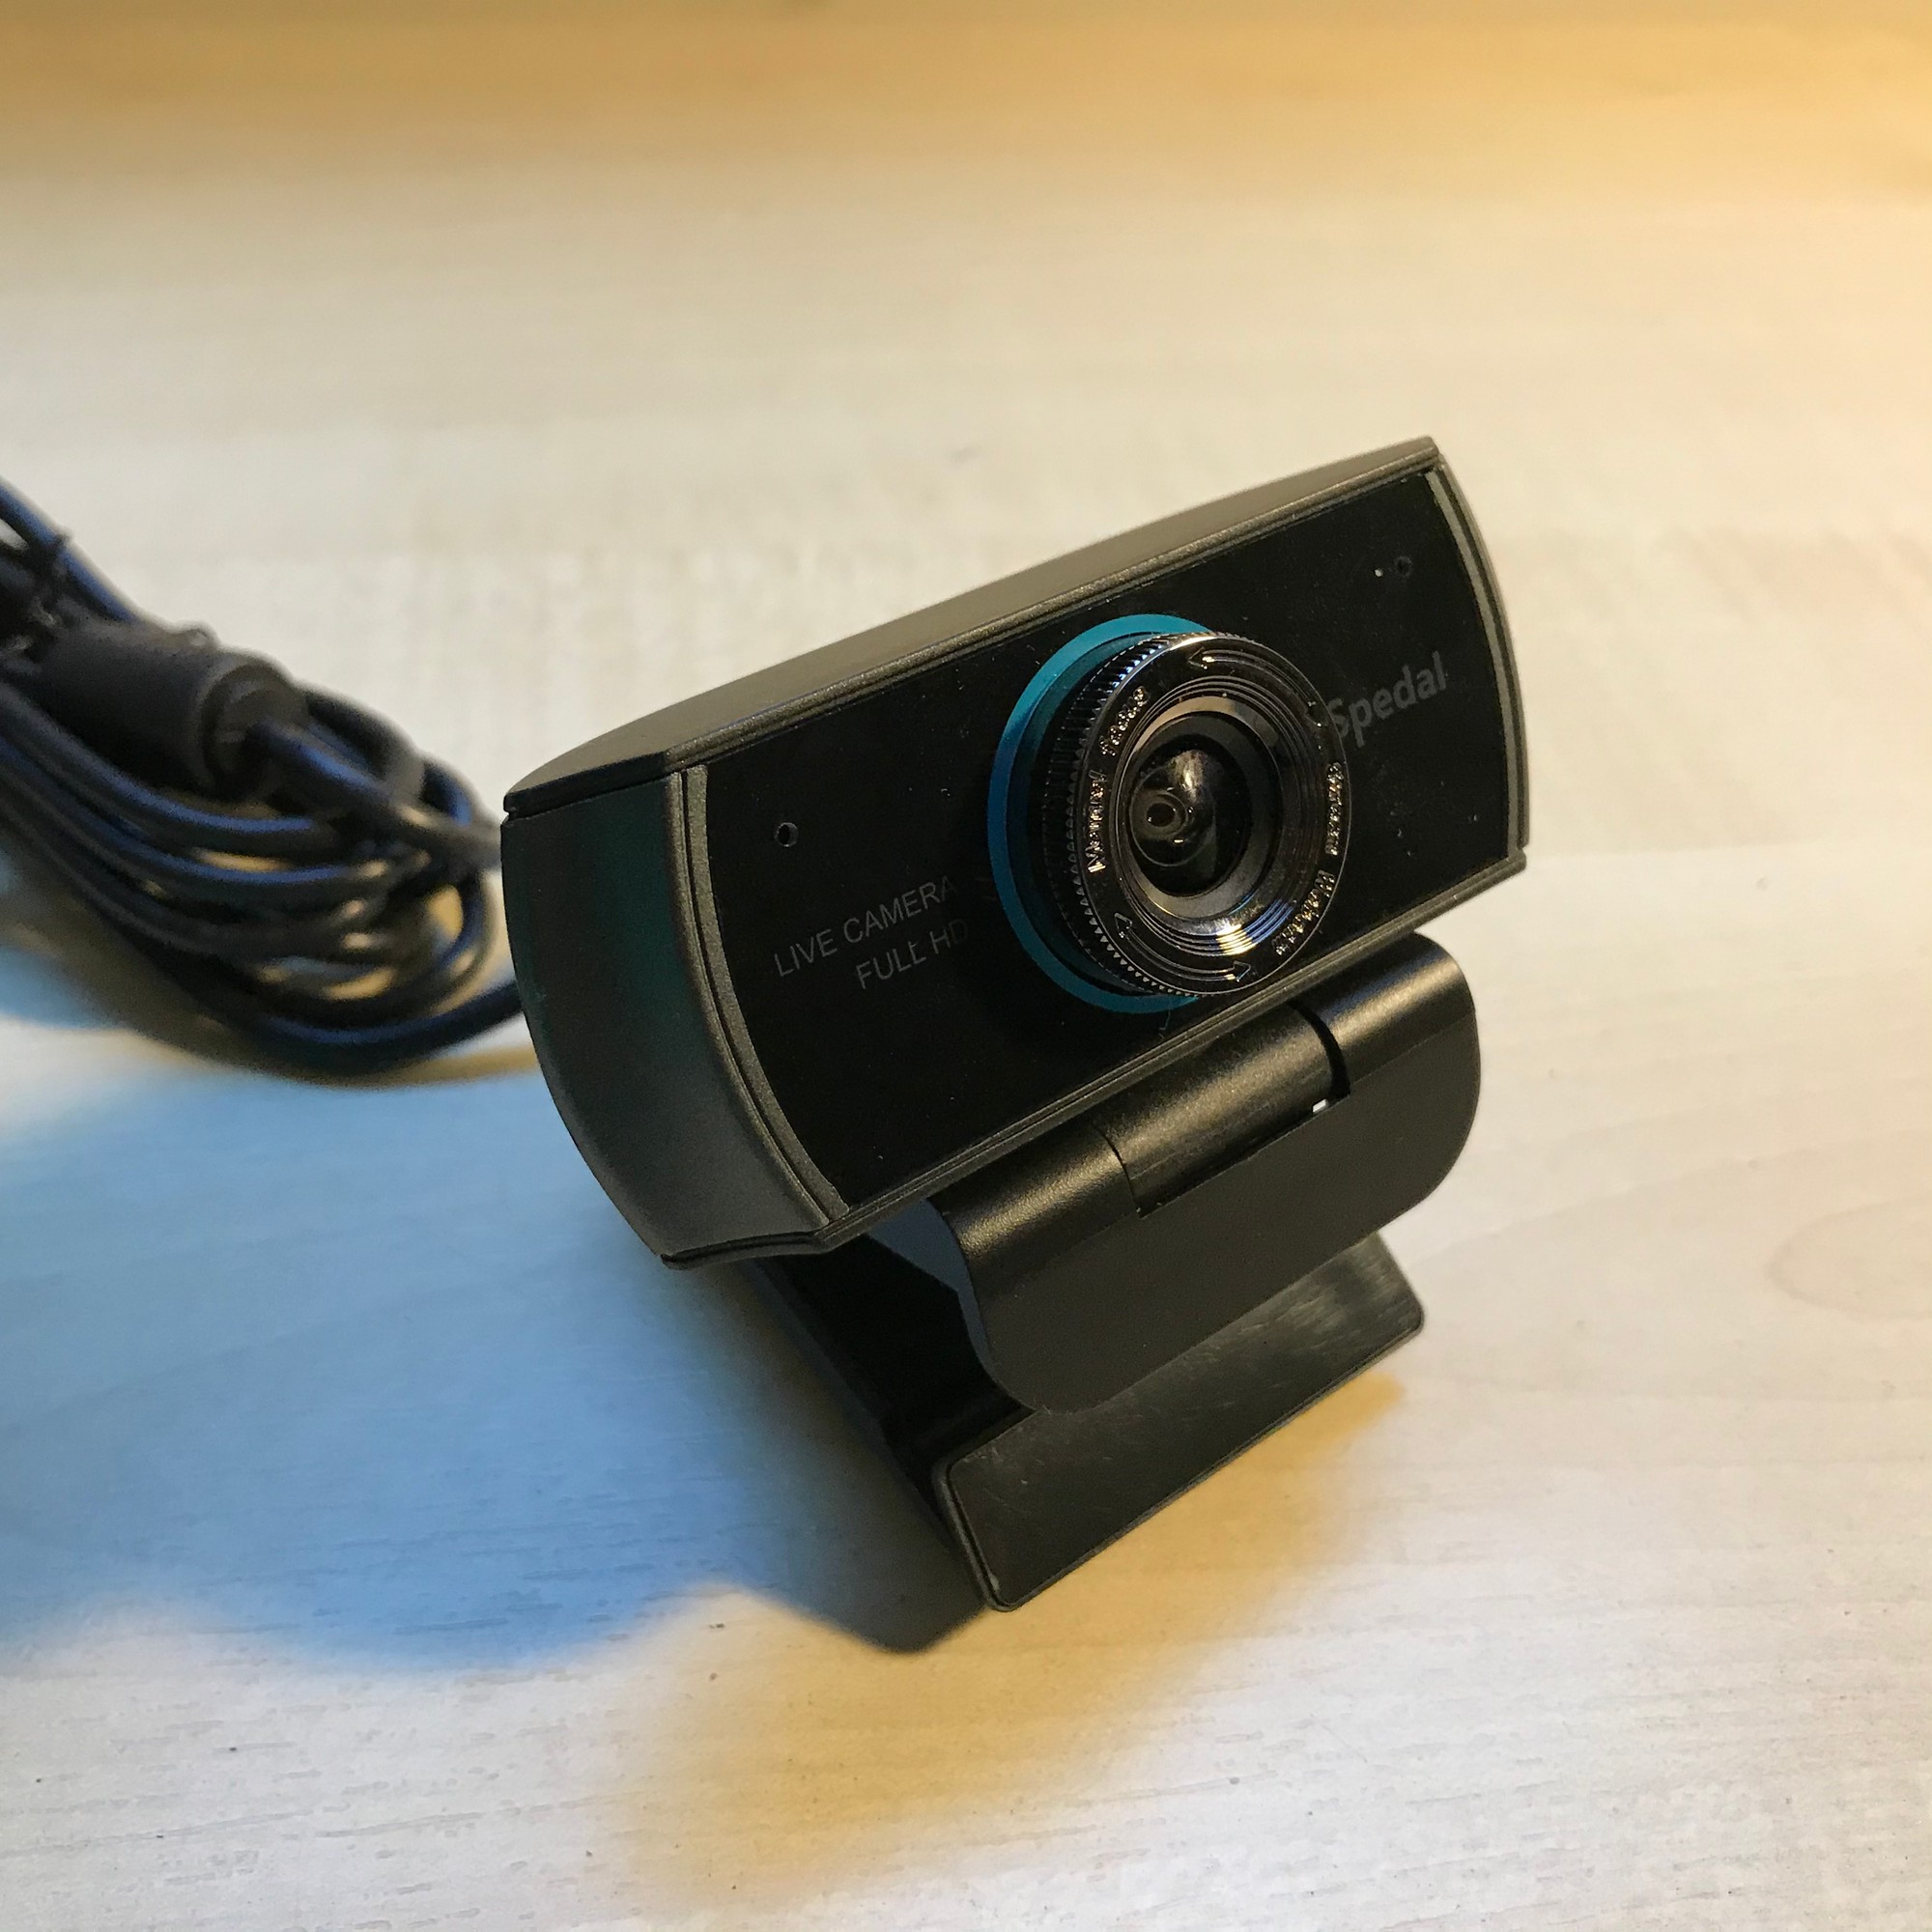 Spedal MF920 Webcam Review - Affordable Wide-Angle Webcam